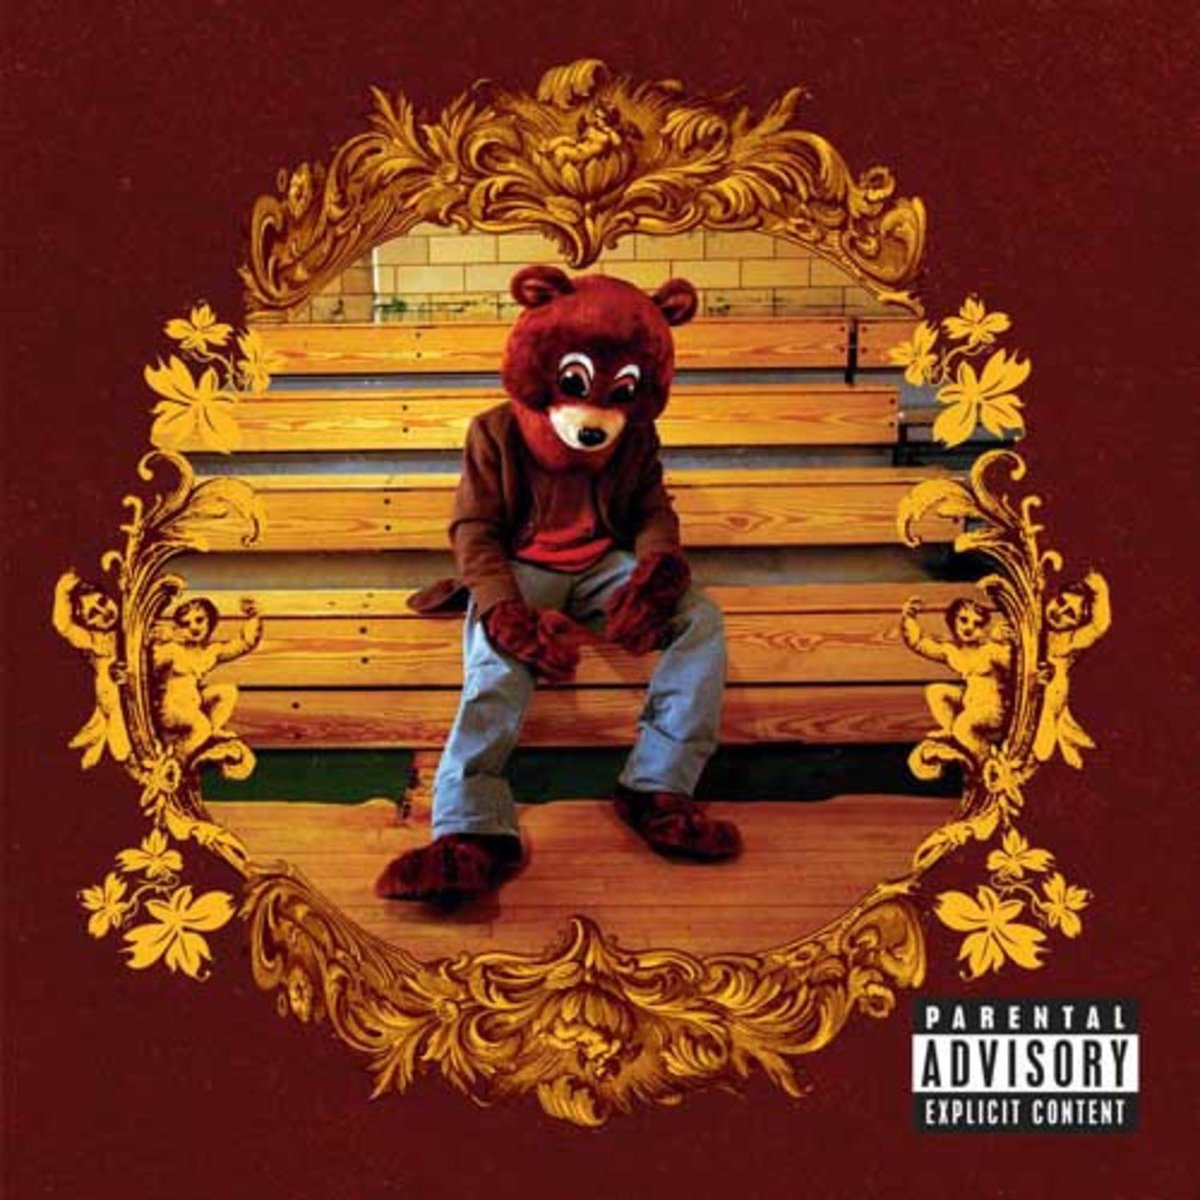 2004 : The College Dropout - Kanye WestOne of the best debut albums of all time. Everything is perfect : the verses, instrumentals, skits, and features. Ye’s nostalgia factor is at it’s largest on this album for me. HM : Madvillainy ,, Encore,, Mm..Food